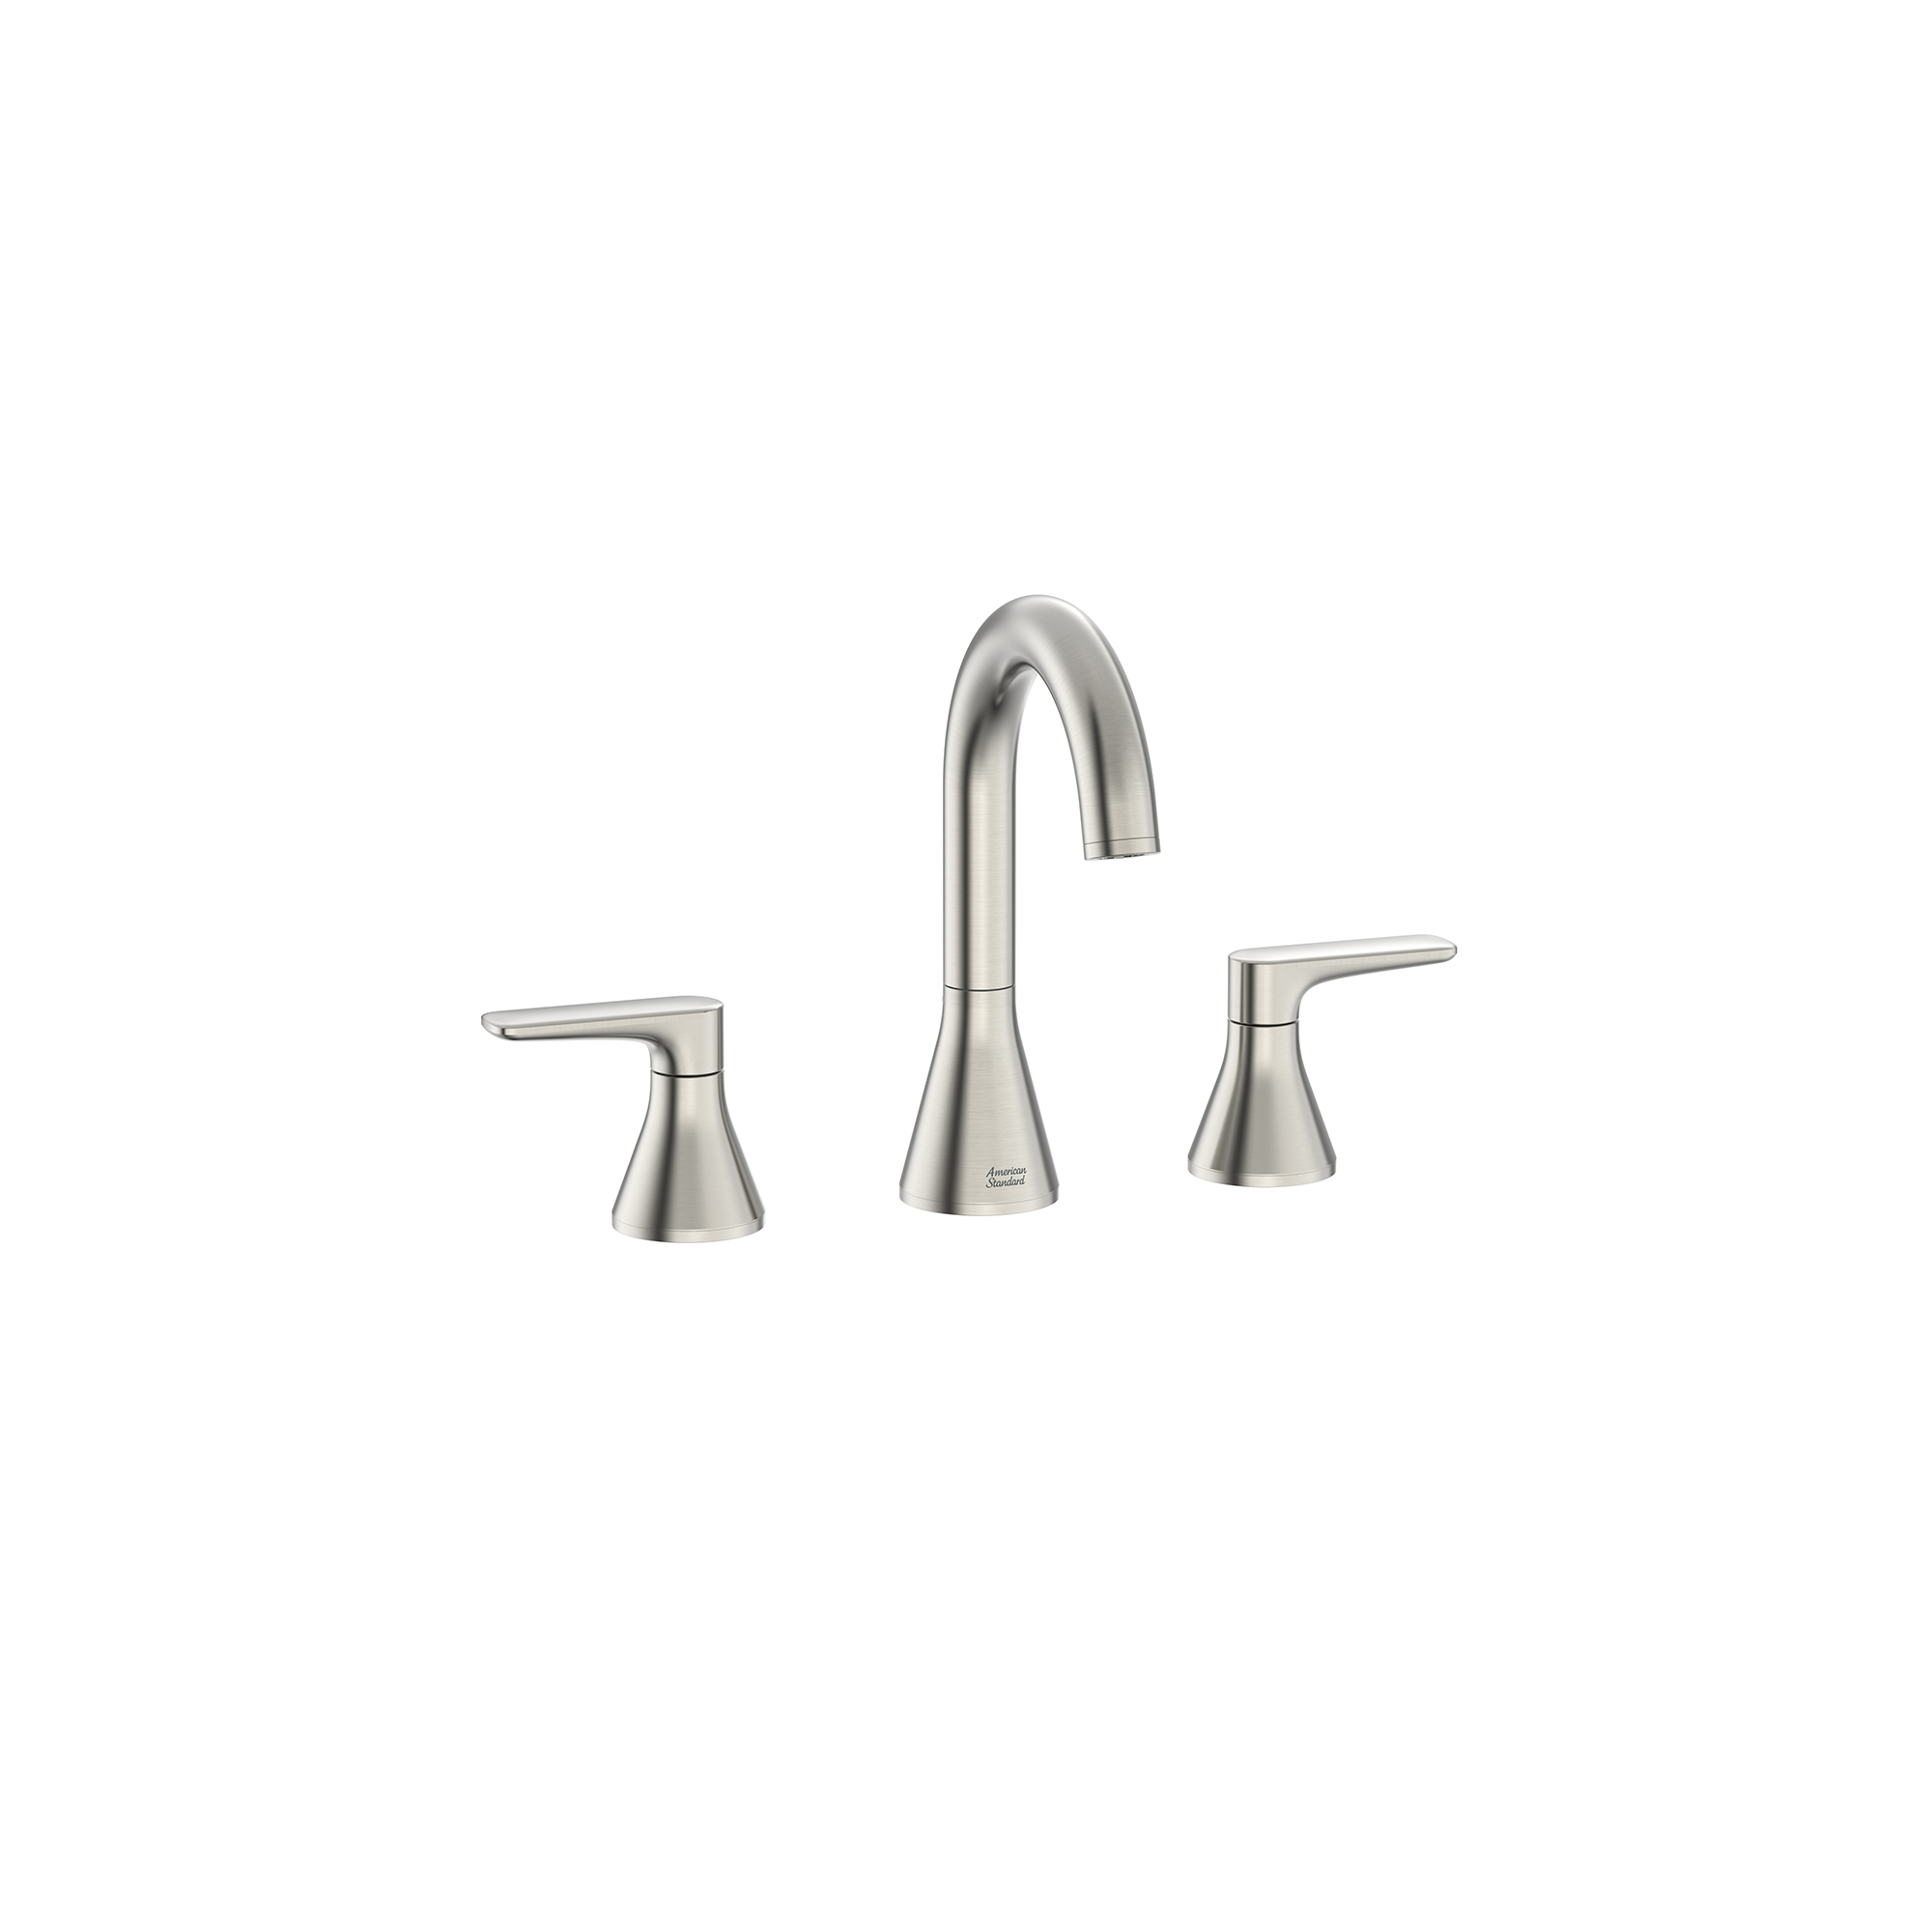 Aspirations™ 8-Inch Widespread 2-Handle Bathroom Faucet 1.2 gpm/4.5 L/min With Lever Handles